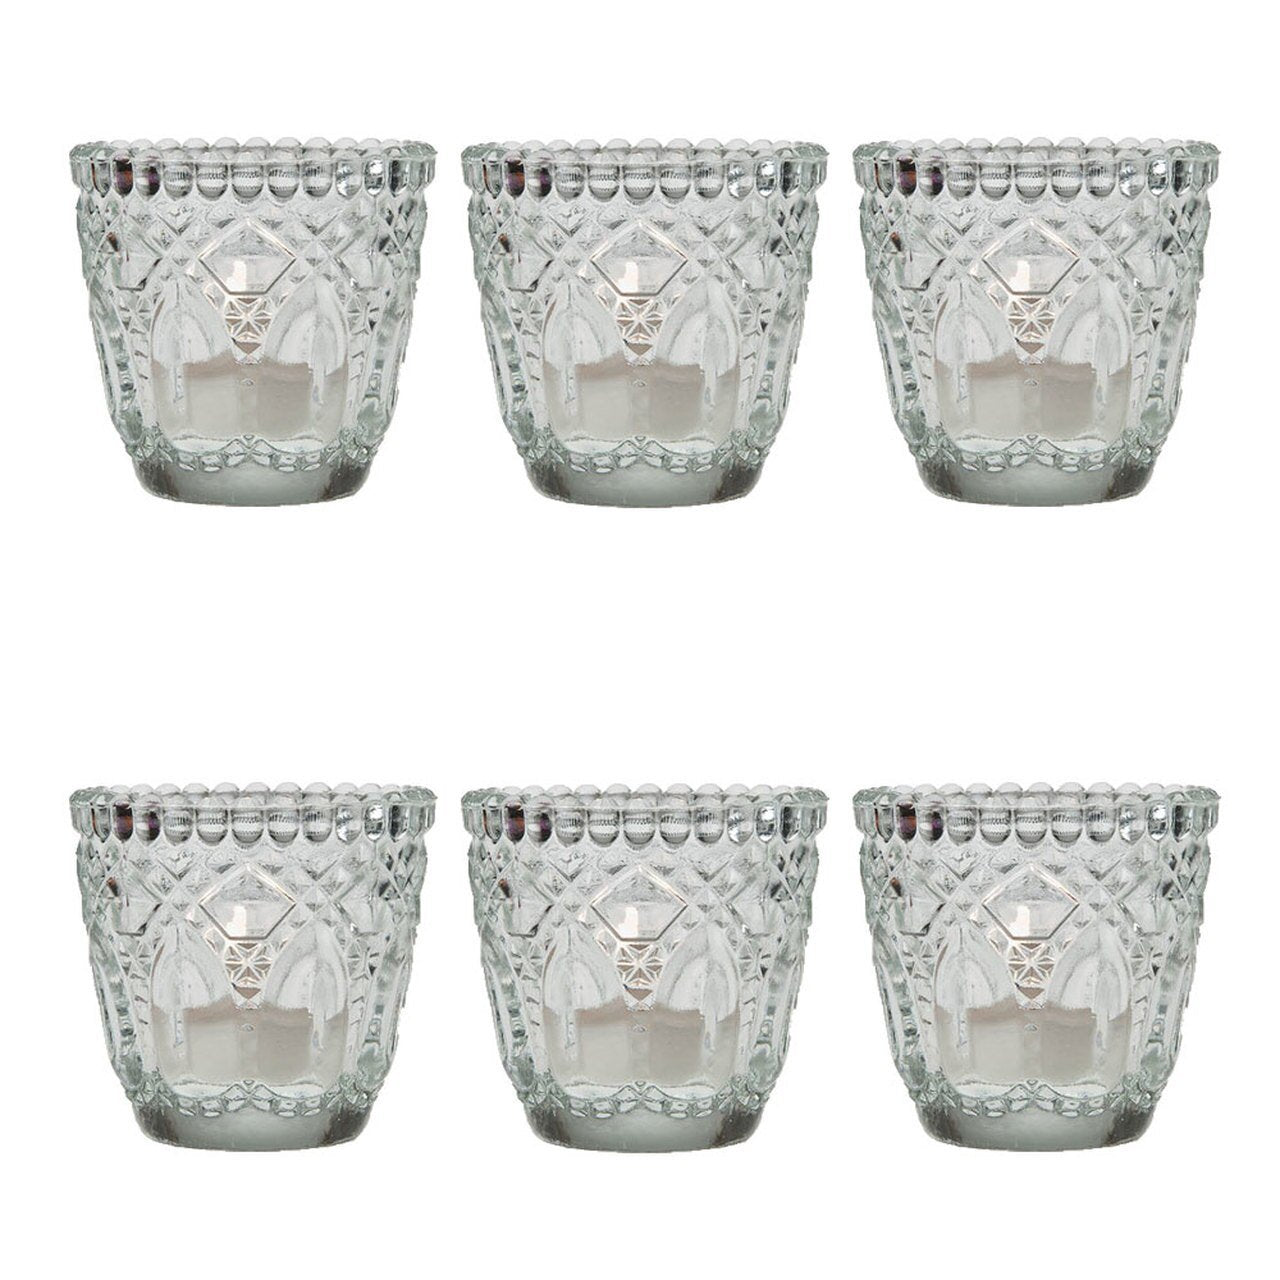 6 Pack | Faceted Vintage Glass Candle Holders (2.75-Inch, Lillian Design, Clear) - Use with Tea Lights - For Home Decor, Parties and Wedding Decorations - AsianImportStore.com - B2B Wholesale Lighting & Decor since 2002